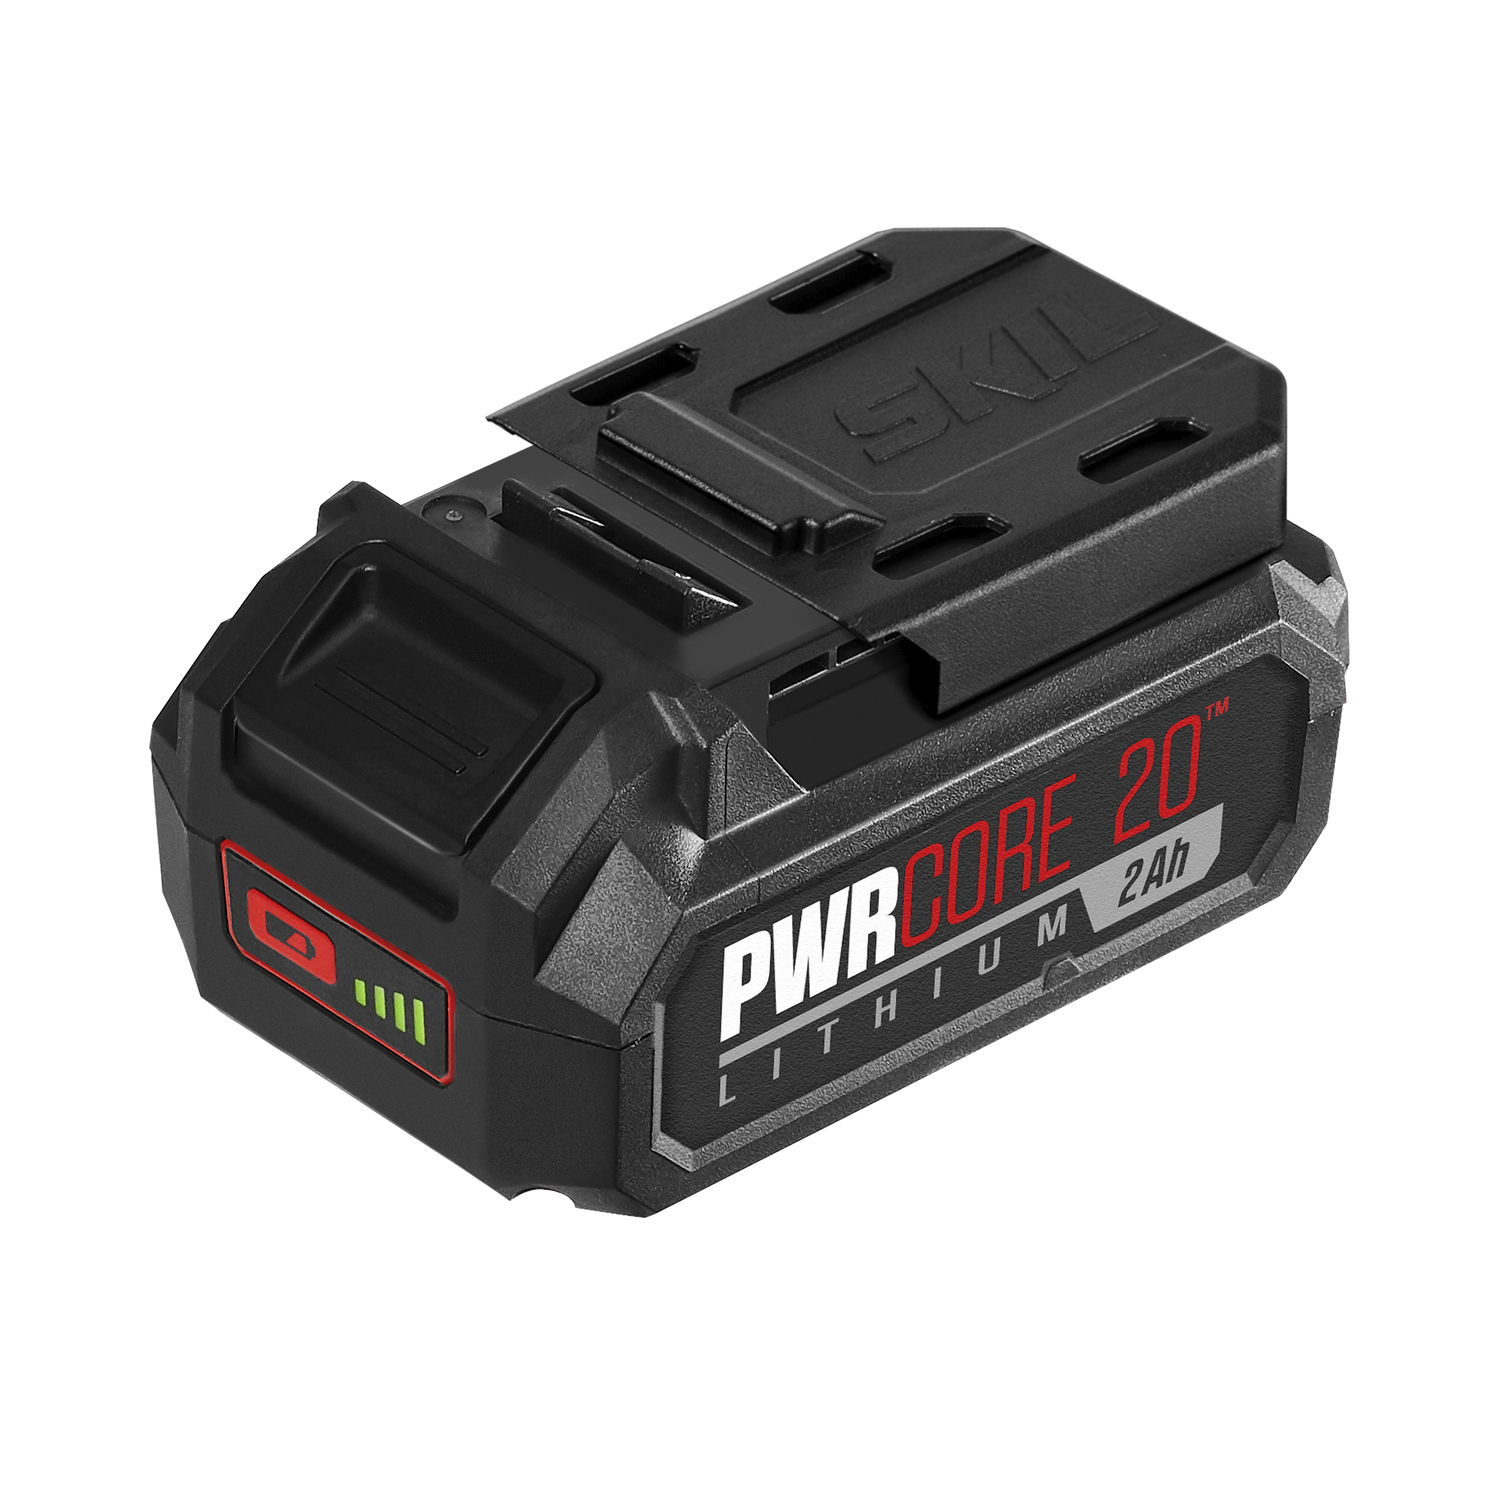 Photos - Power Tool Battery Skil 20V PWRCore 20 2 Ah Lithium-Ion Battery with Mobile Charging 1 pc BY5 